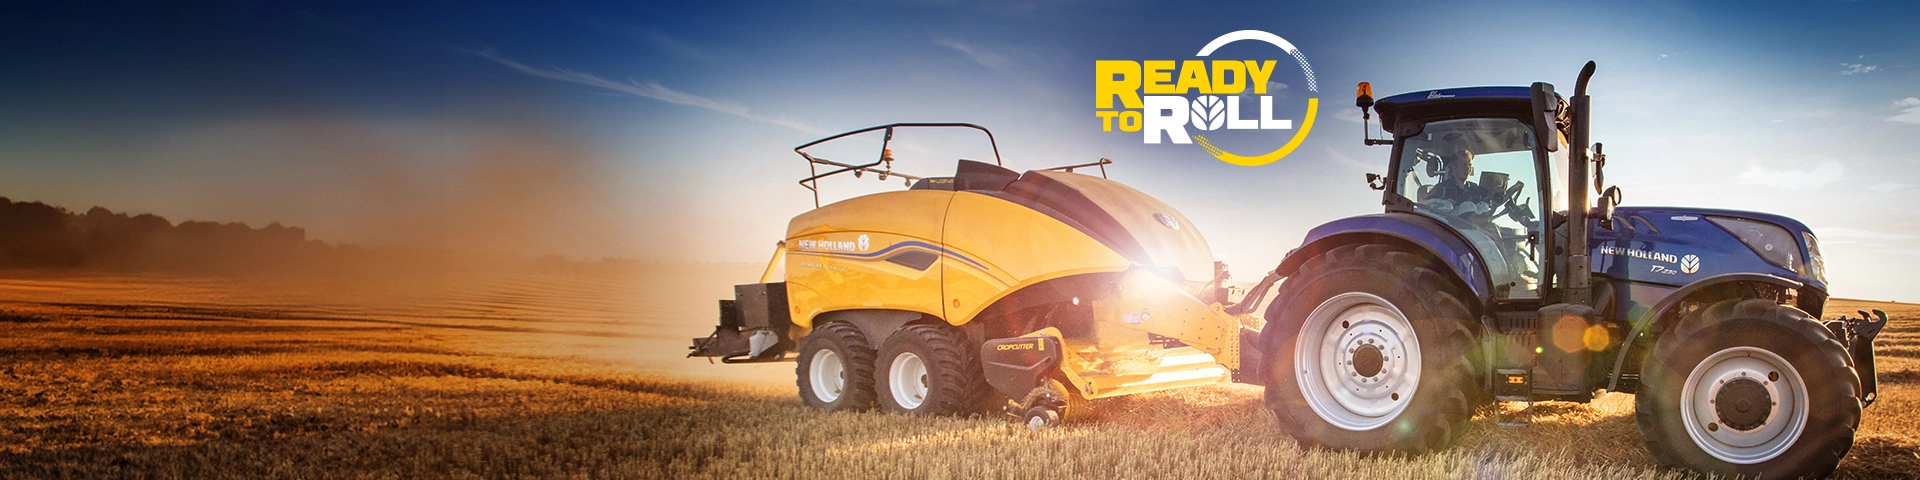 Special offers on New Holland commercial haytools